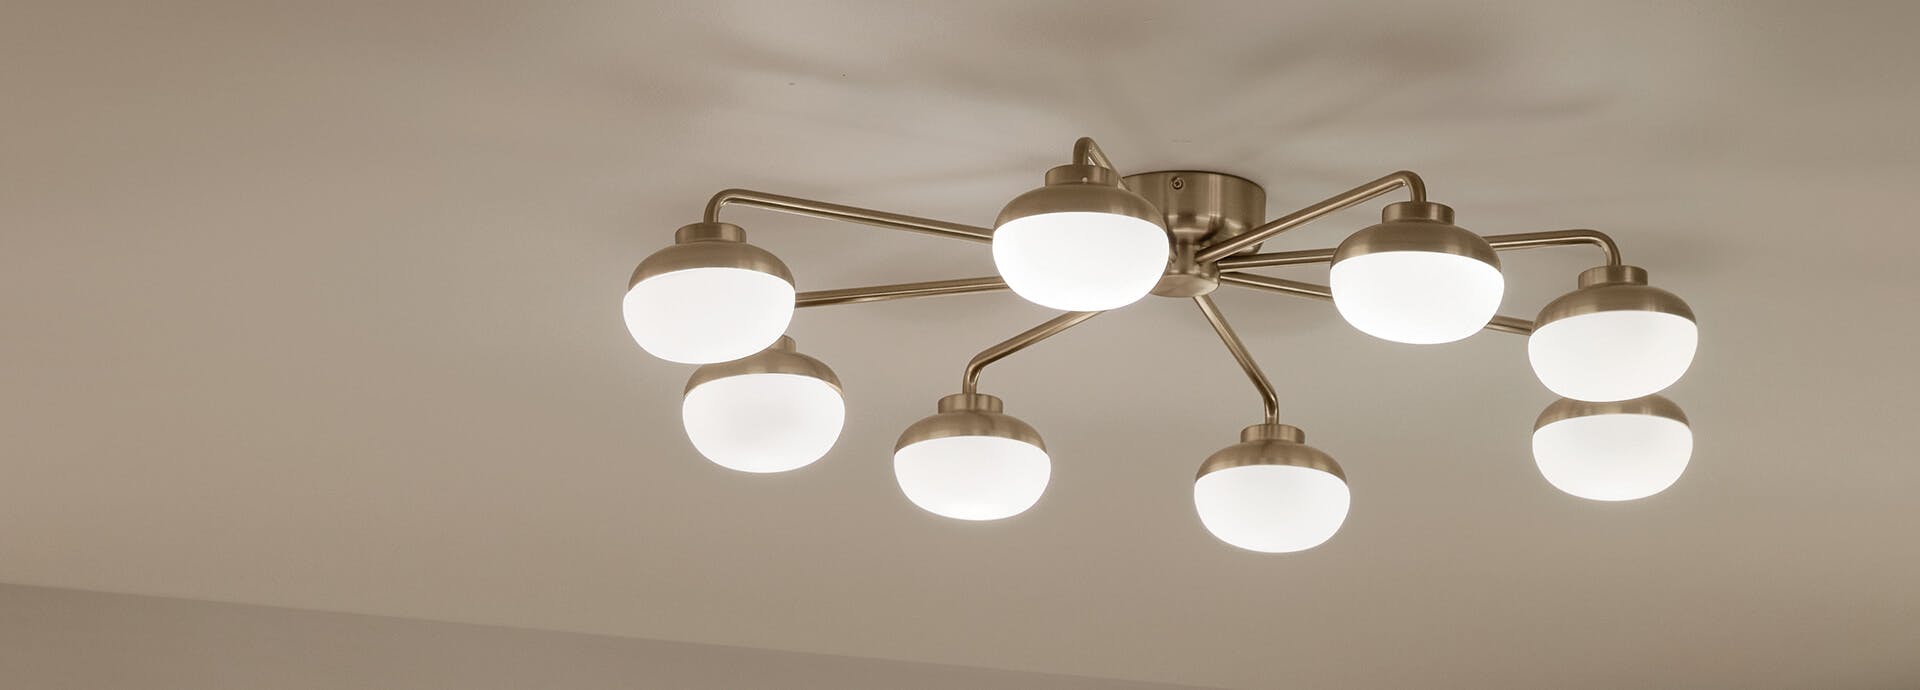 Close-up of a lit Remy flush mount light in champagne bronze on a kitchen ceiling